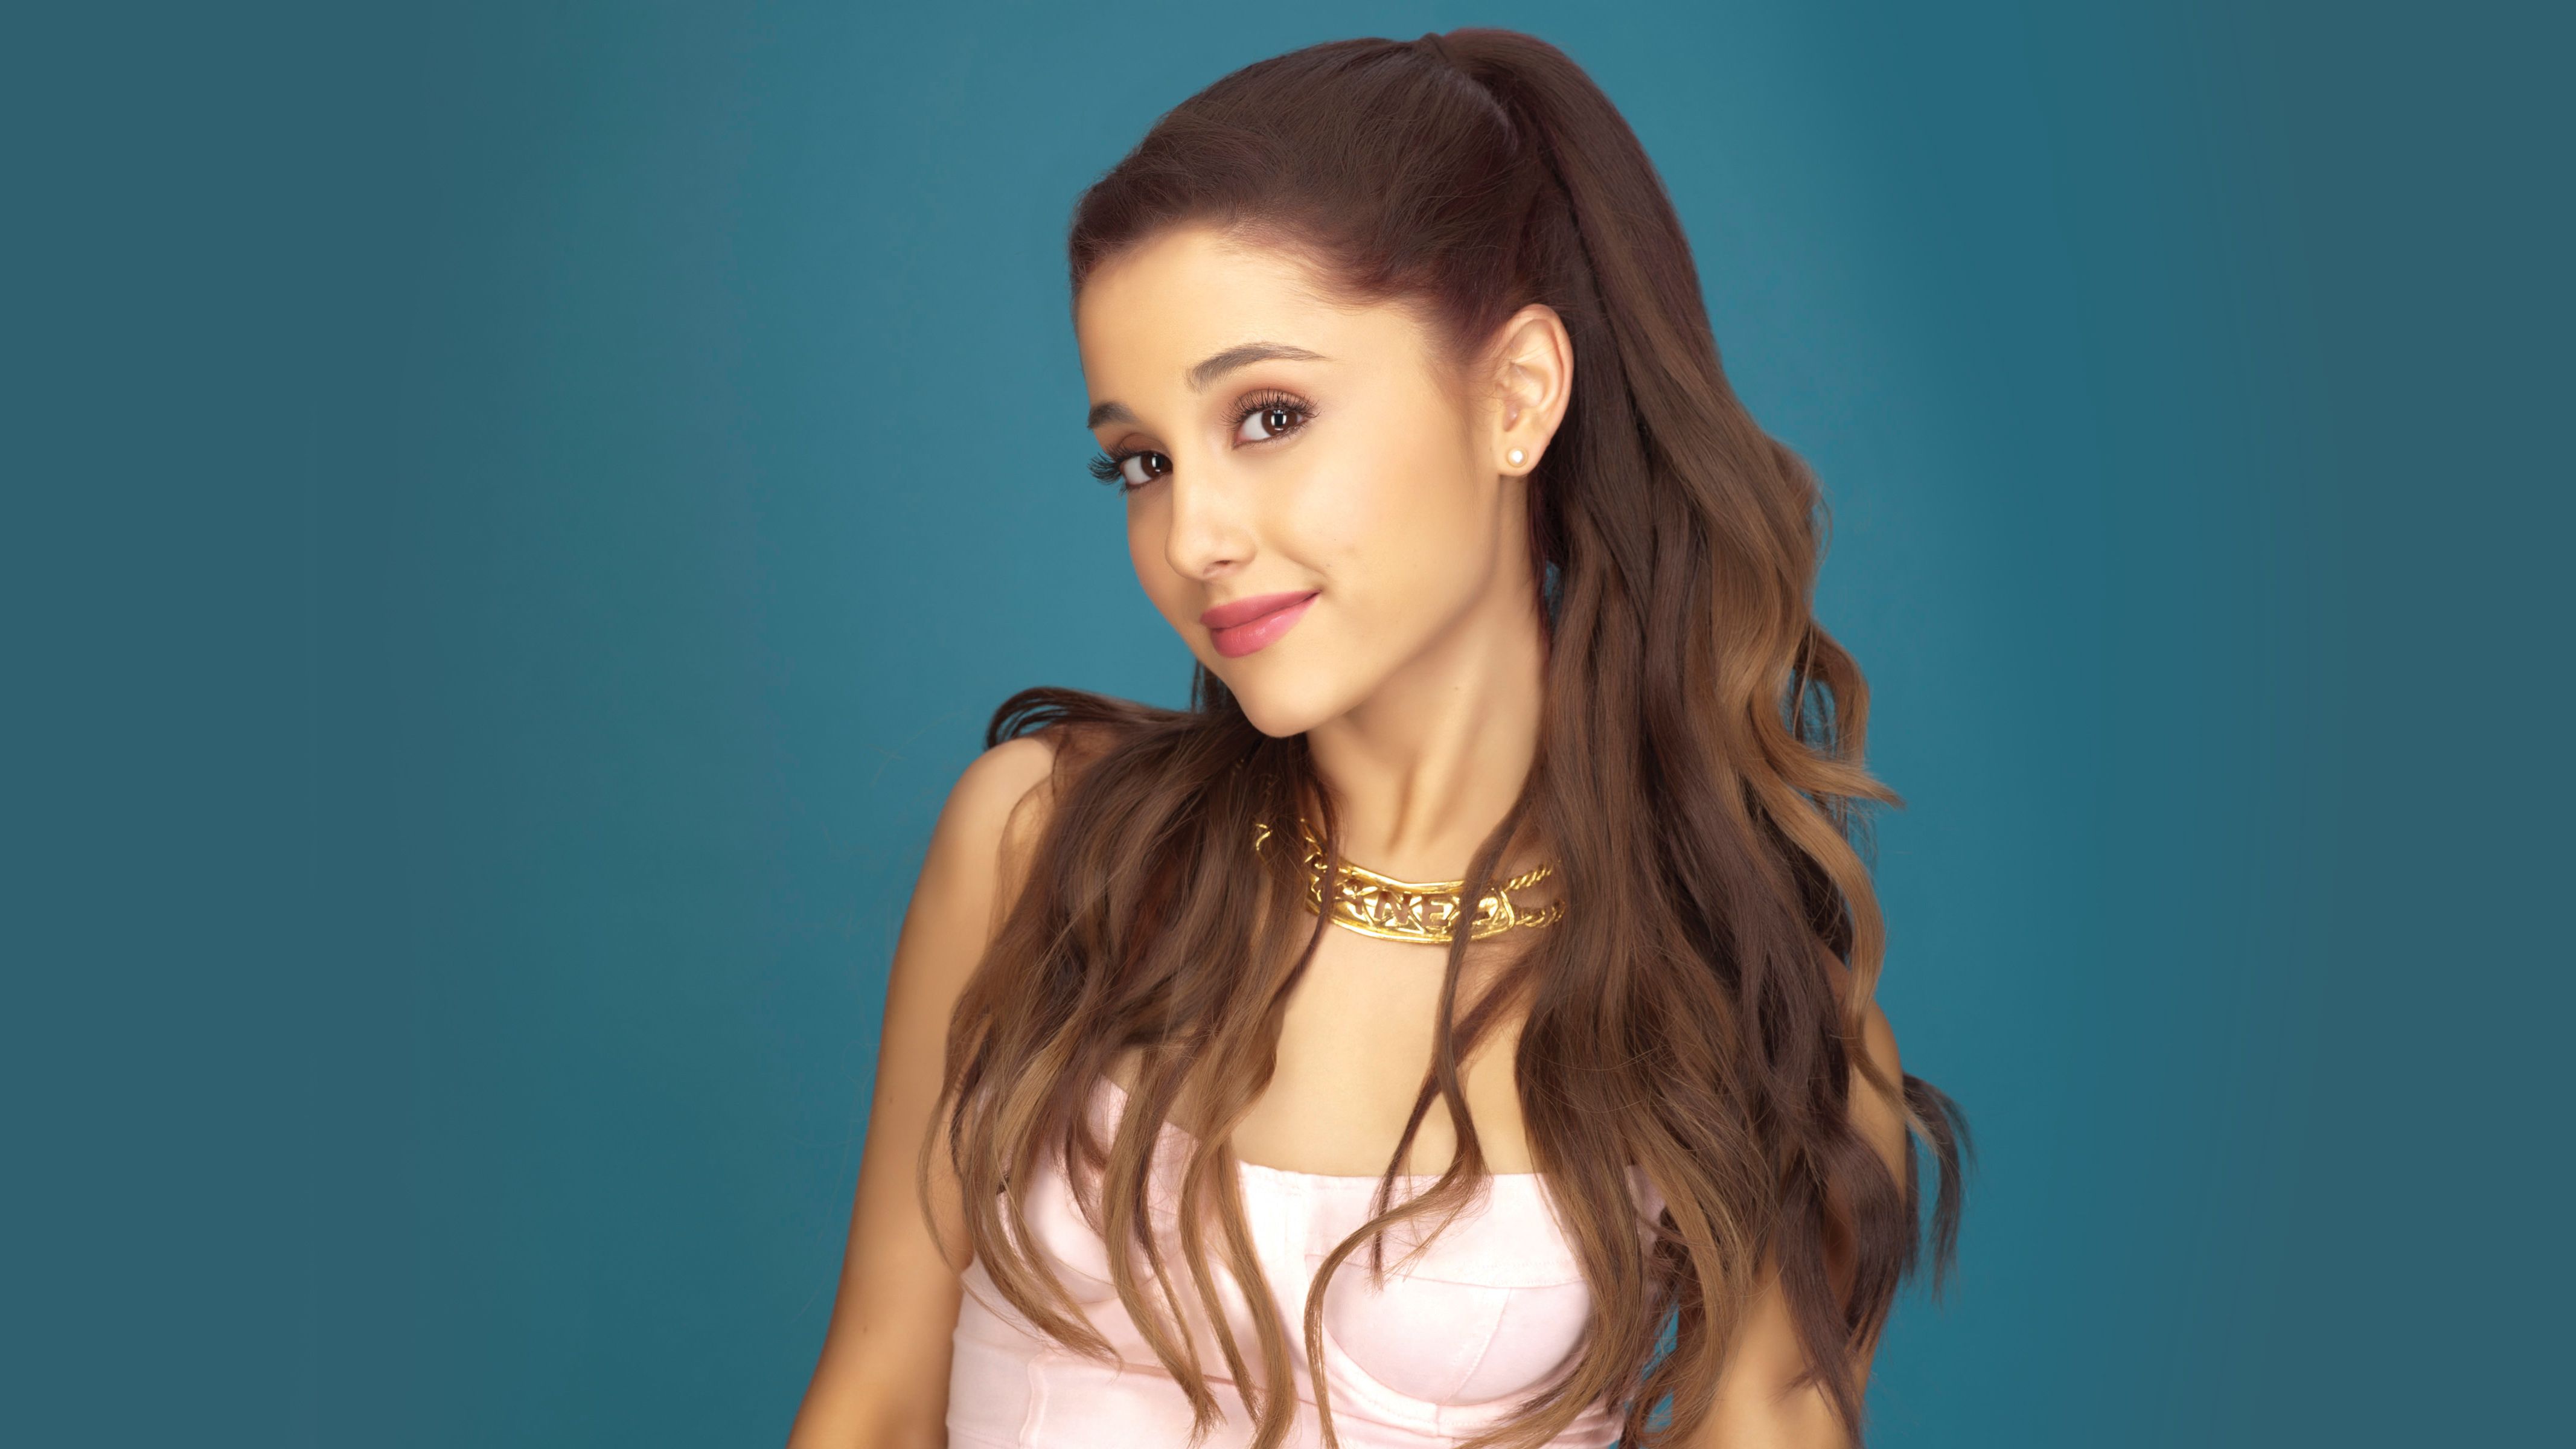 Ariana Grande 4K Widescreen Computer Background 1100 4267x2400 px Picky